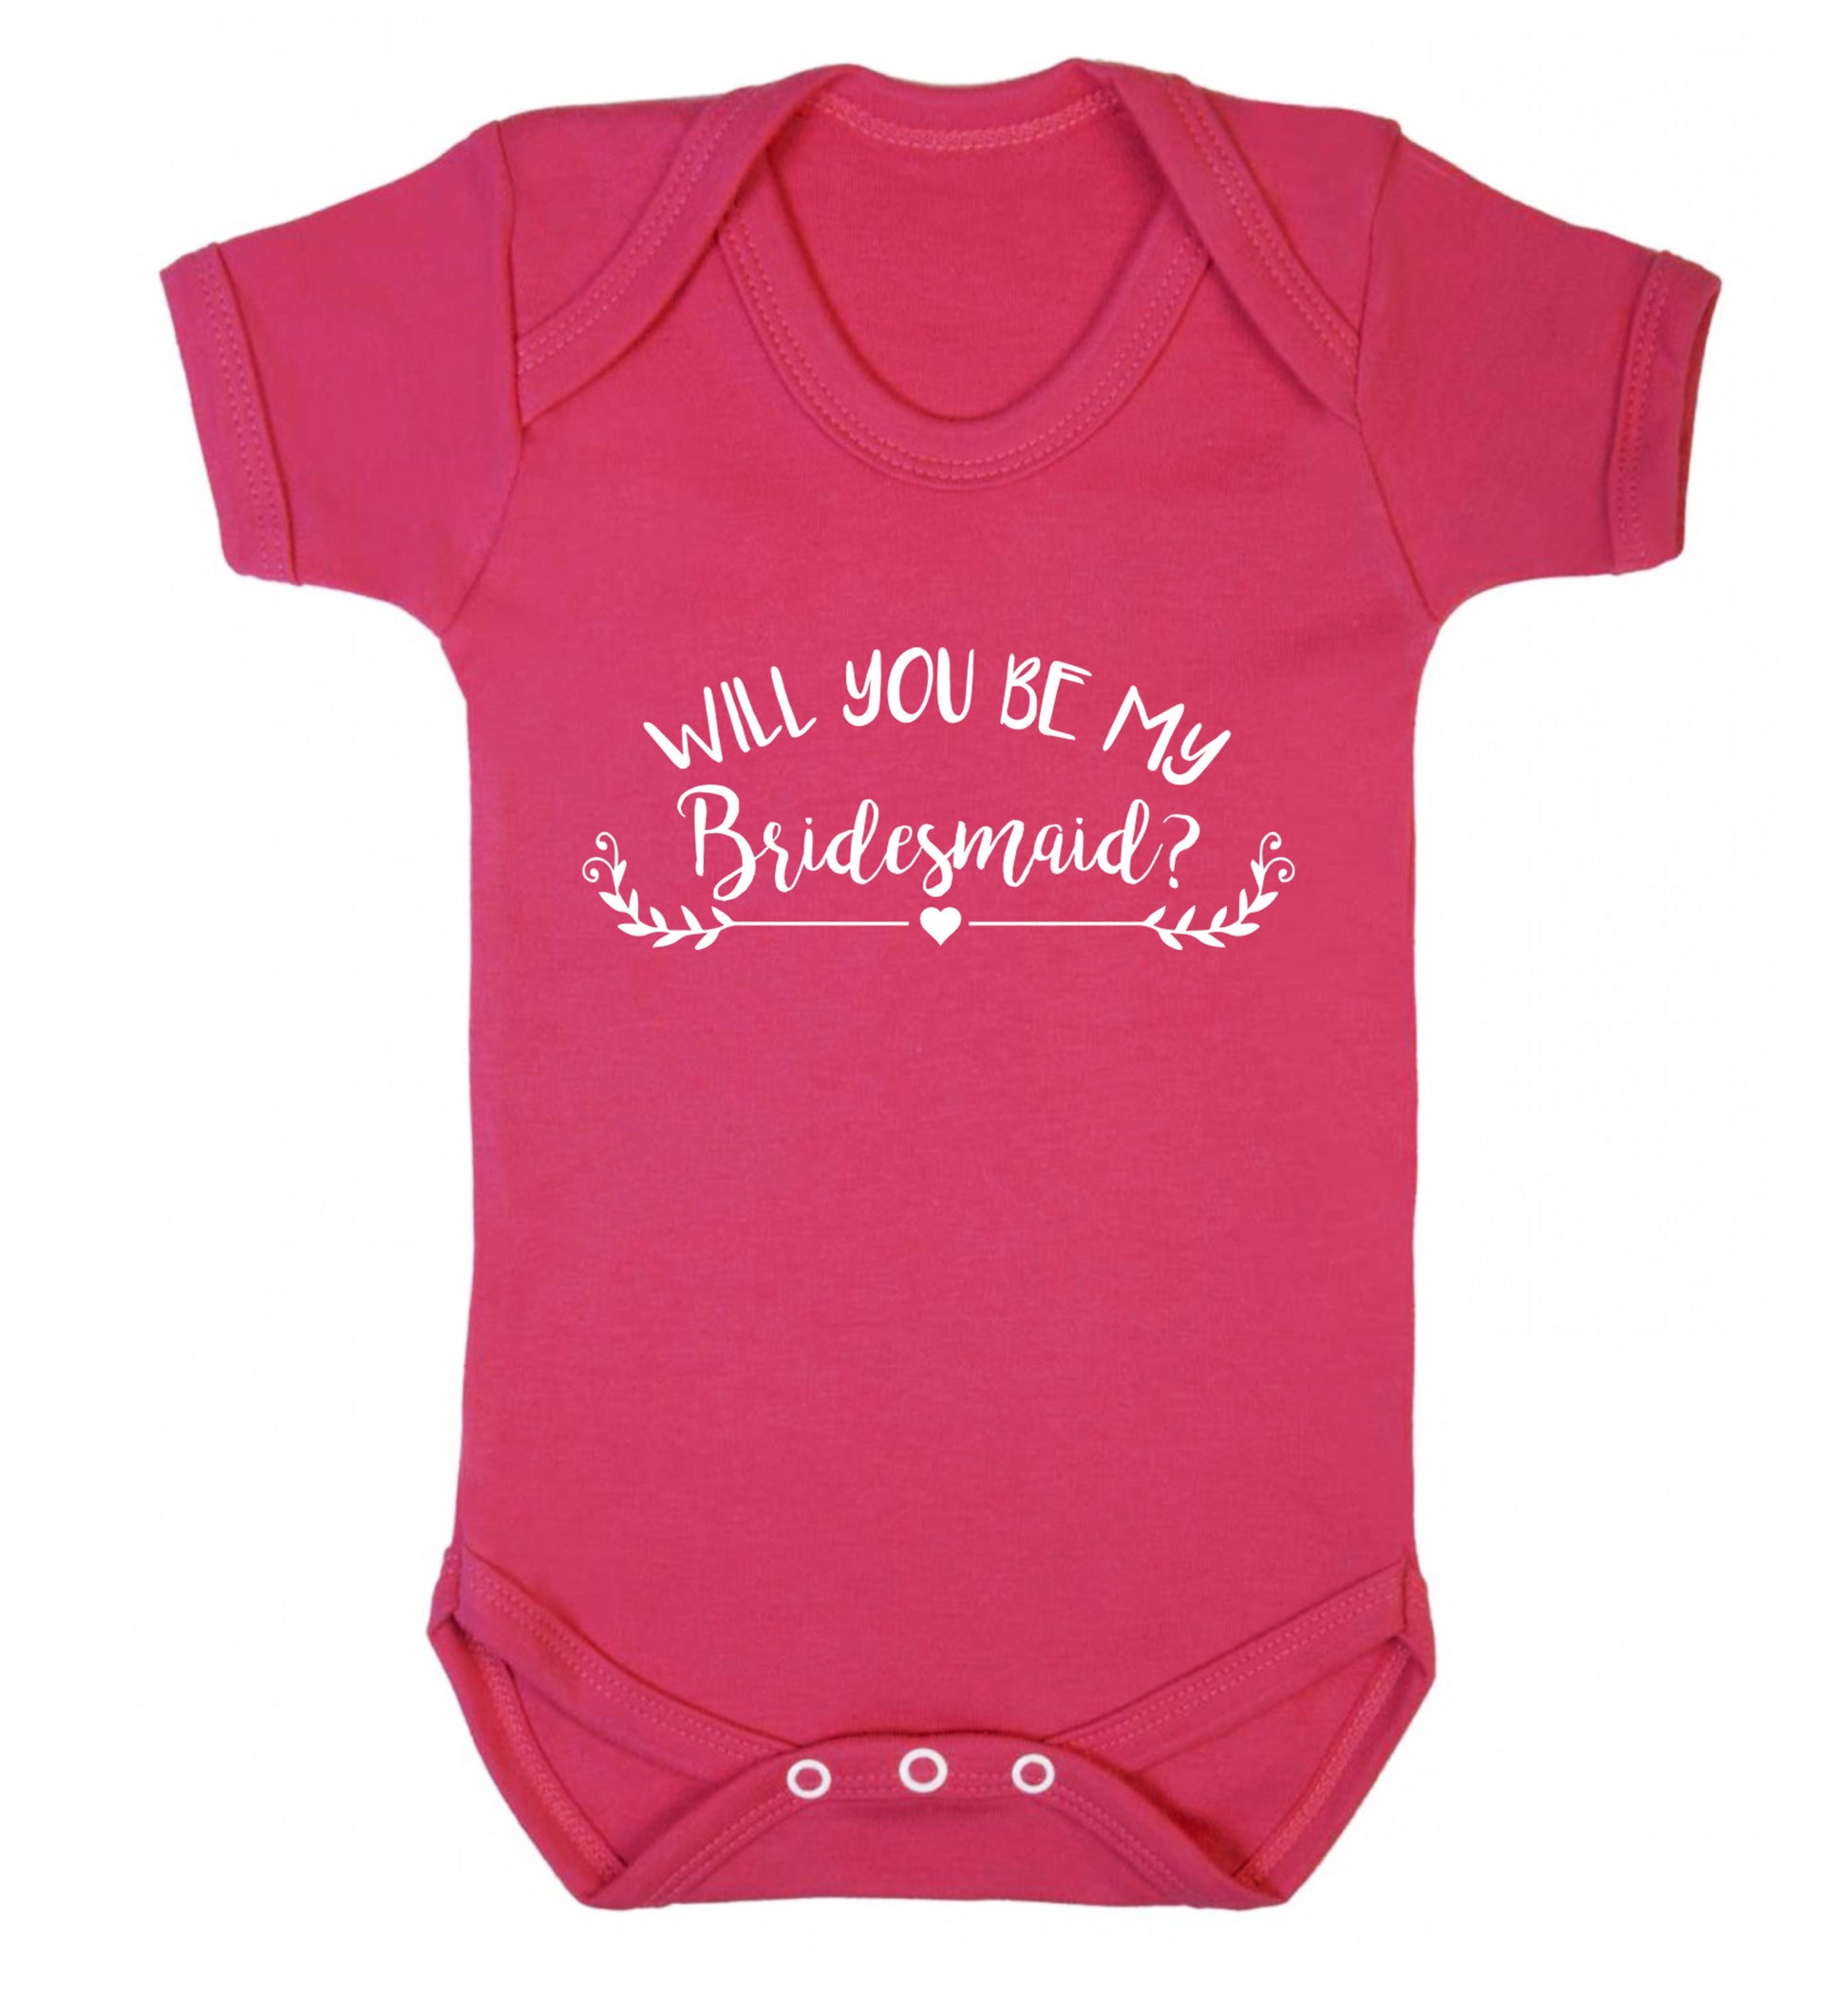 Will you be my bridesmaid? Baby Vest dark pink 18-24 months